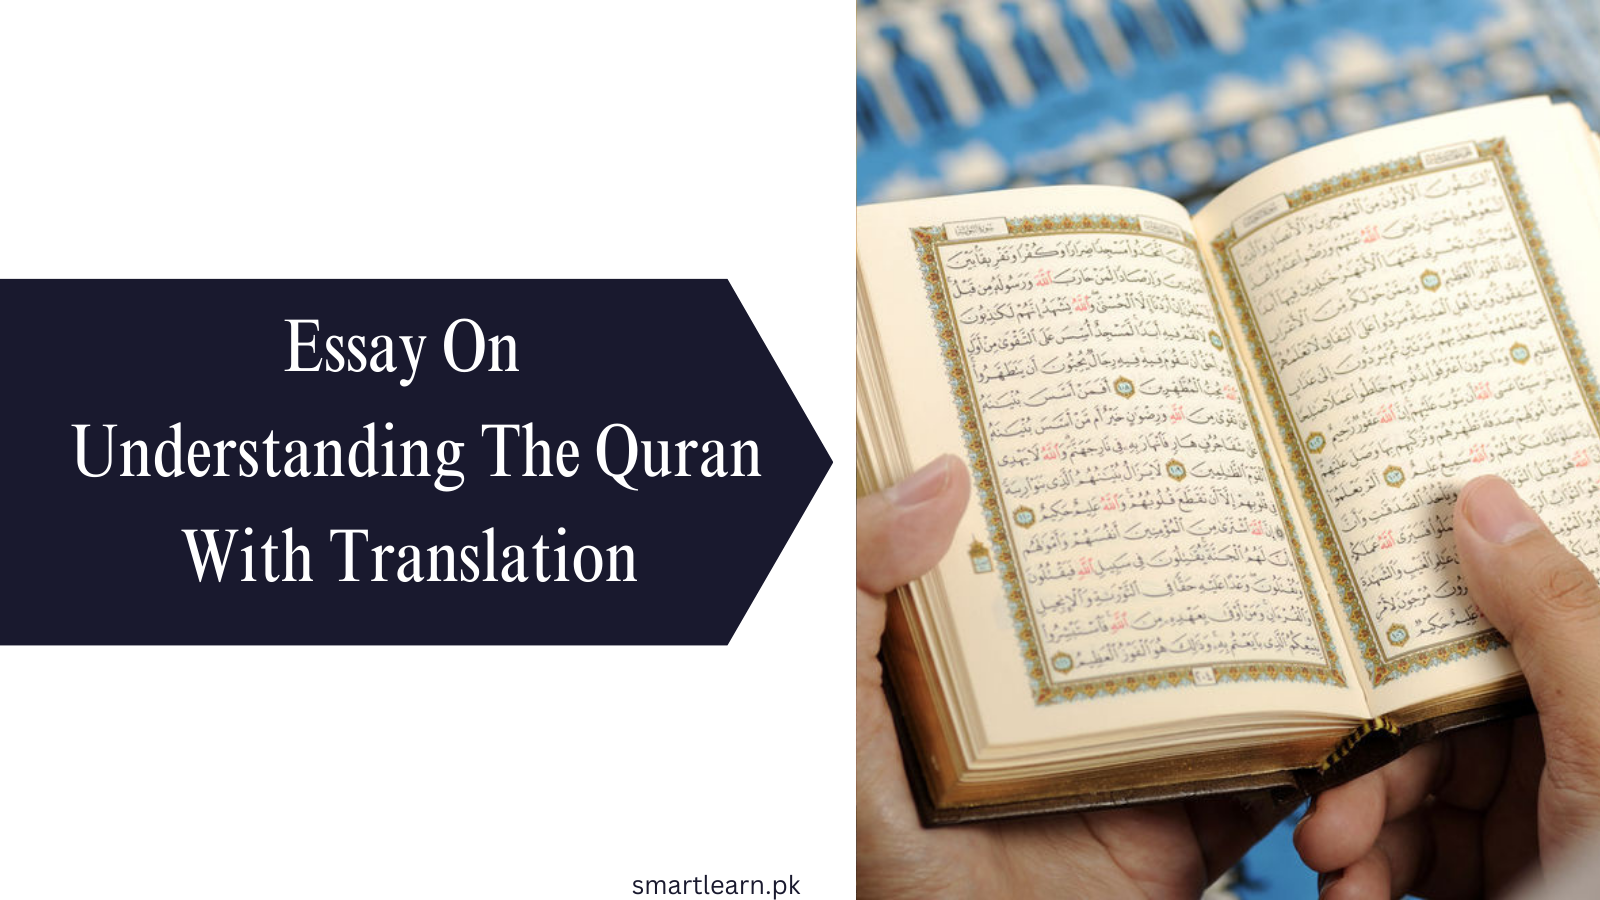 introduction to quran essay